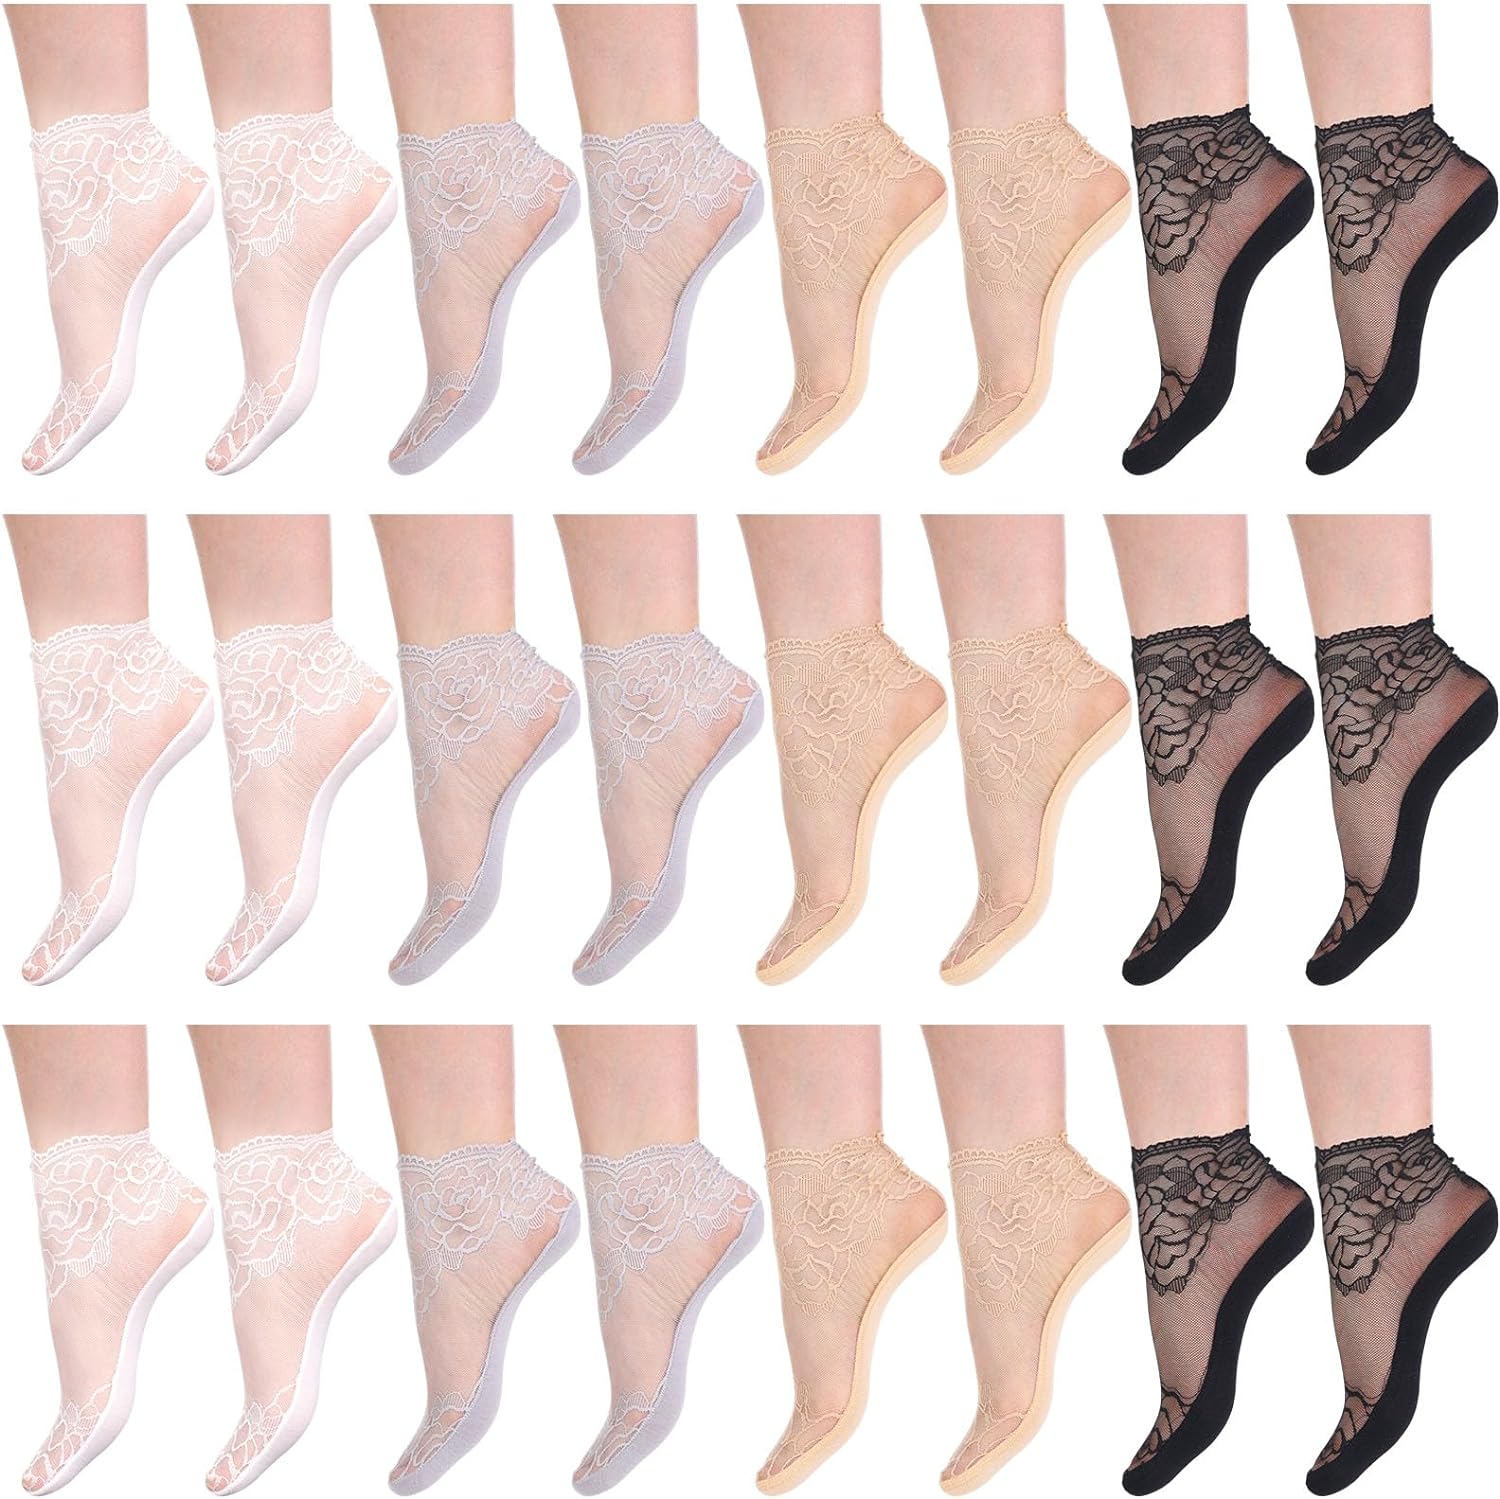 Geyoga 12 Pairs Women' Lace Ankle Socks Mesh Lace Fishnet Ankle Socks for Girls Accessories Dress